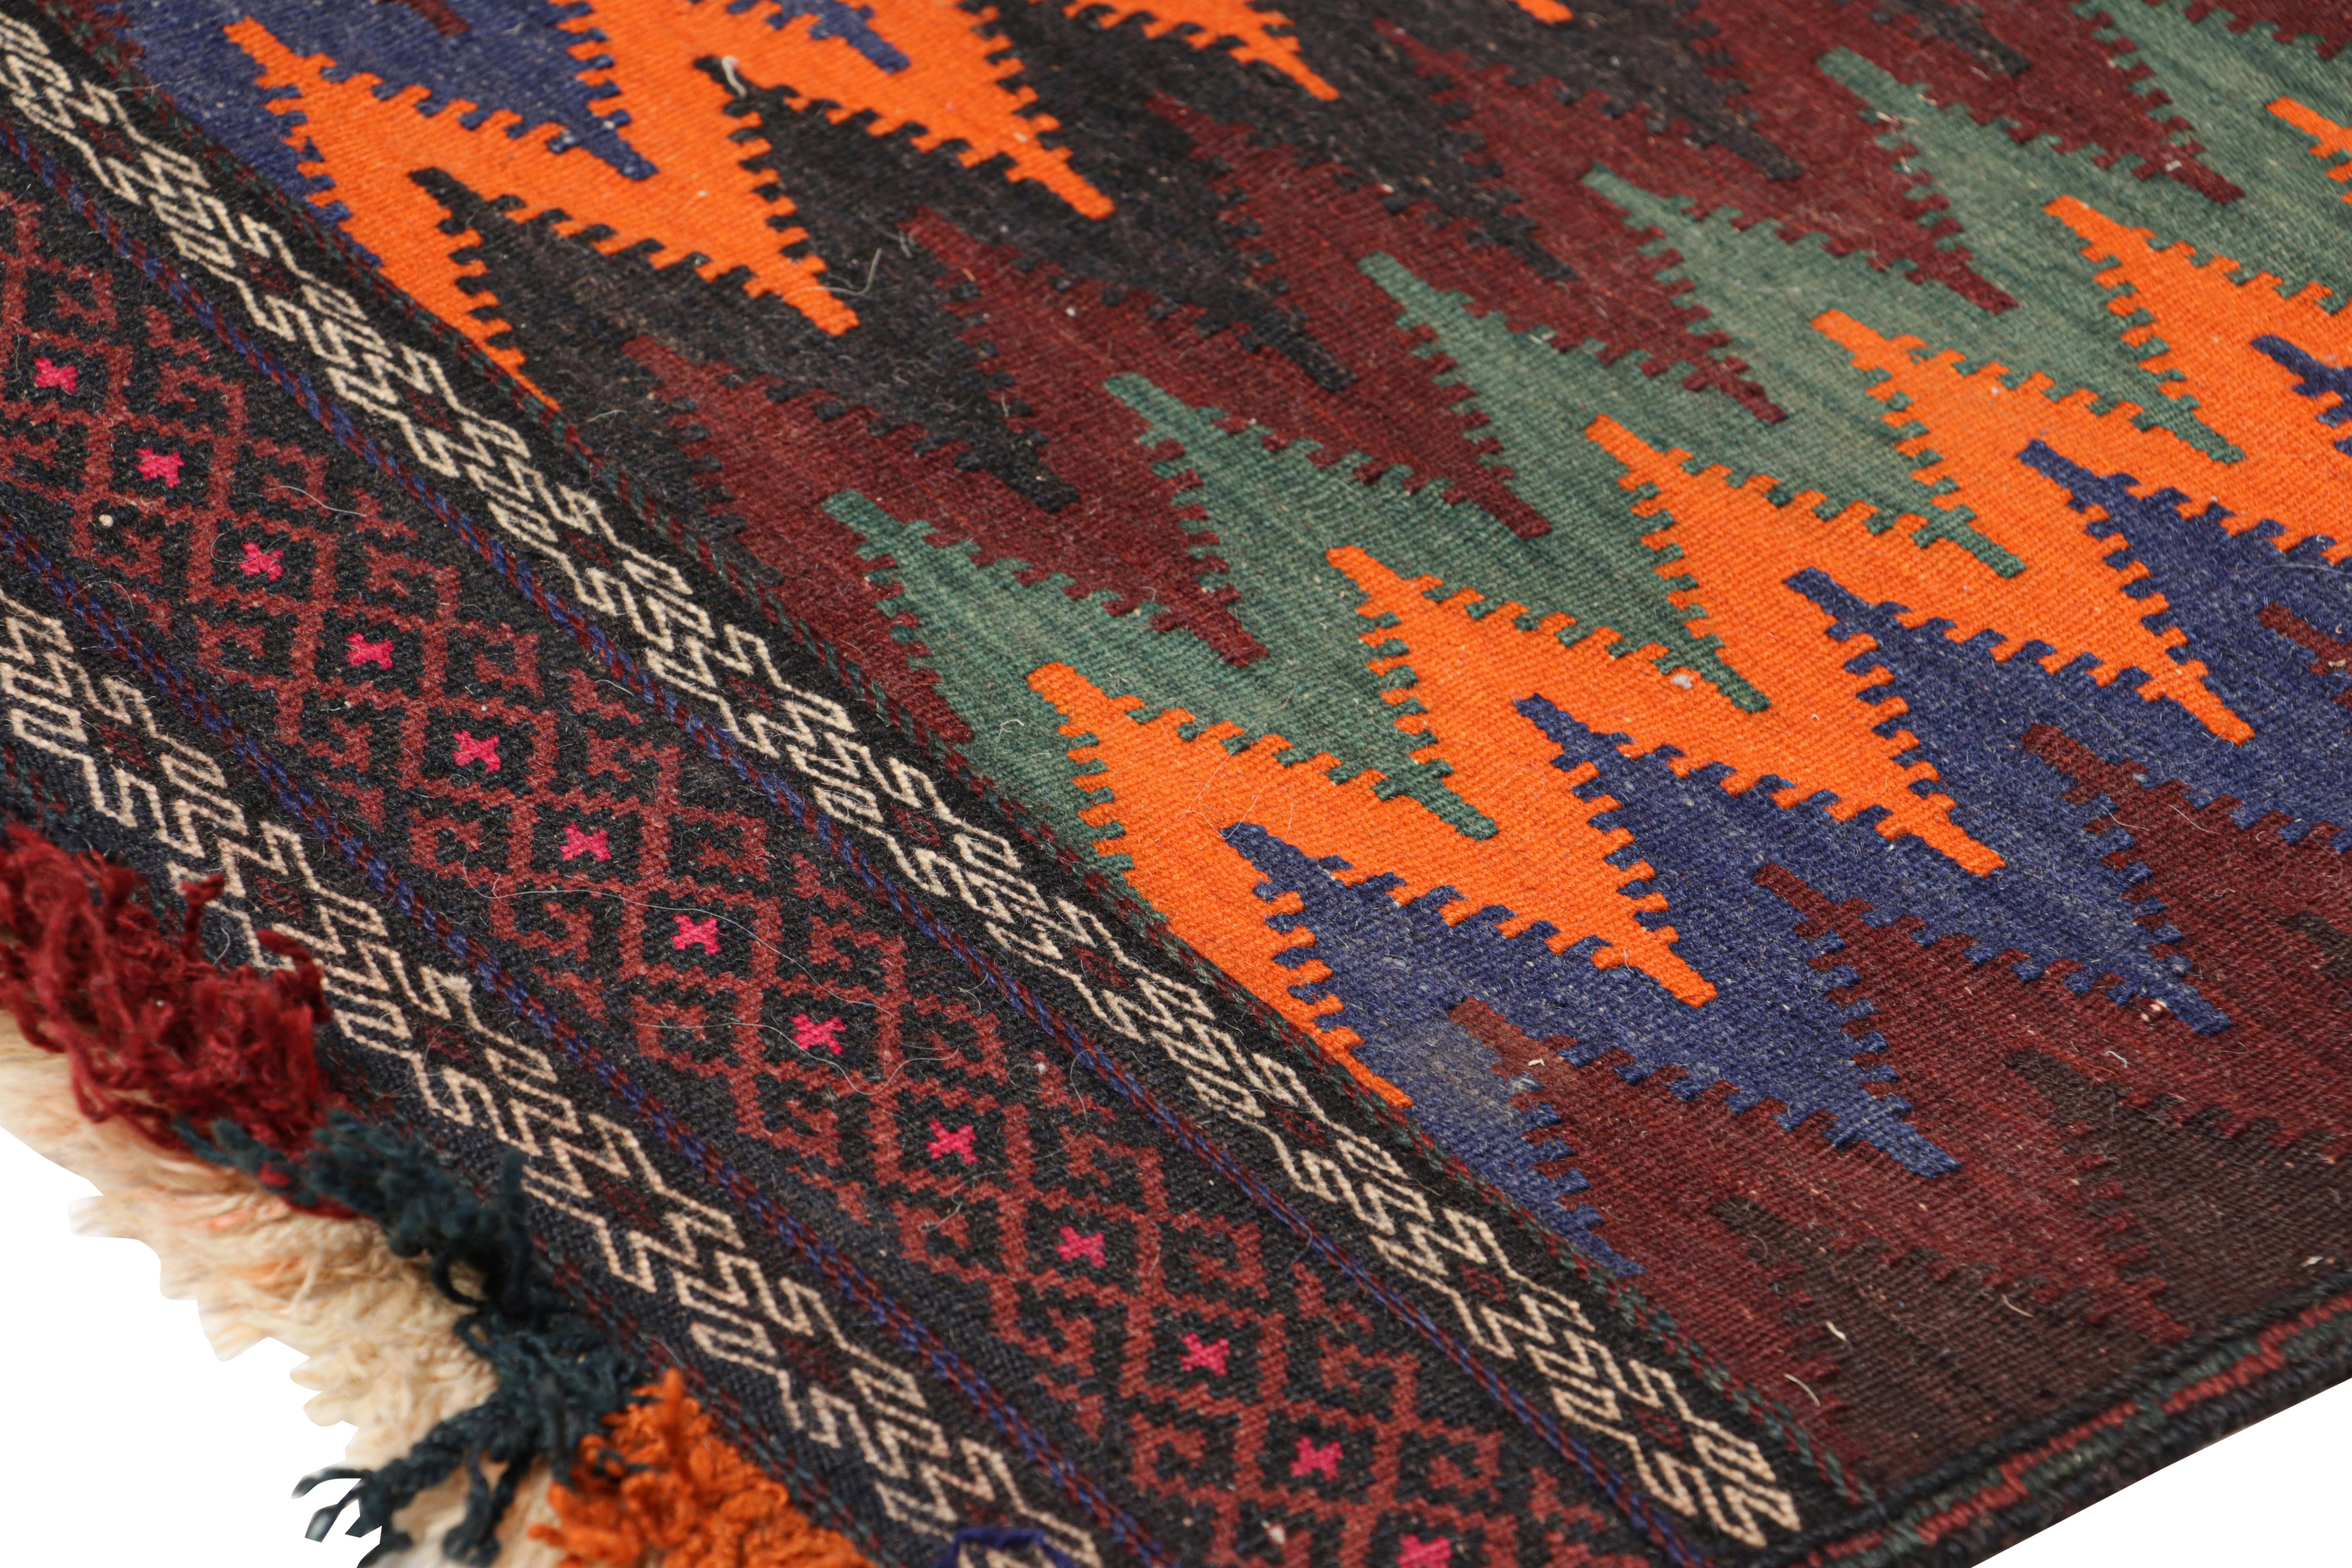 Hand-Woven Vintage Afghan Kilim with Polychromatic Chevron Patterns, from Rug & Kilim For Sale